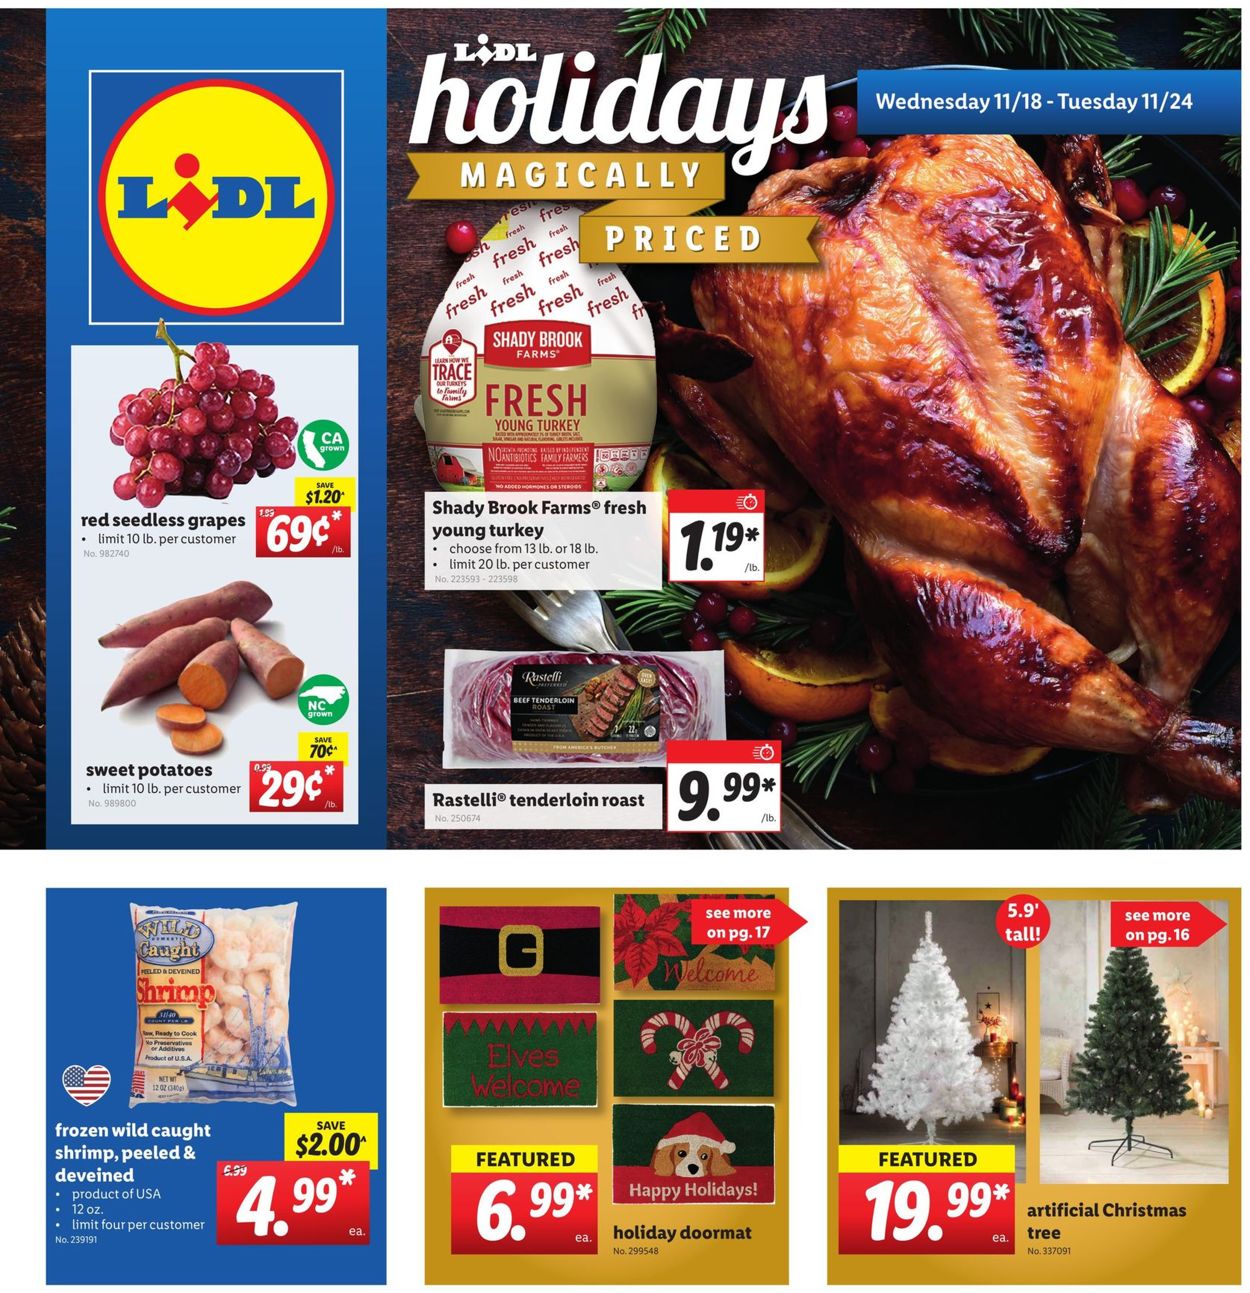 Lidl Holidays 2020 Current weekly ad 11/18 - 11/24/2020 - frequent-ads.com